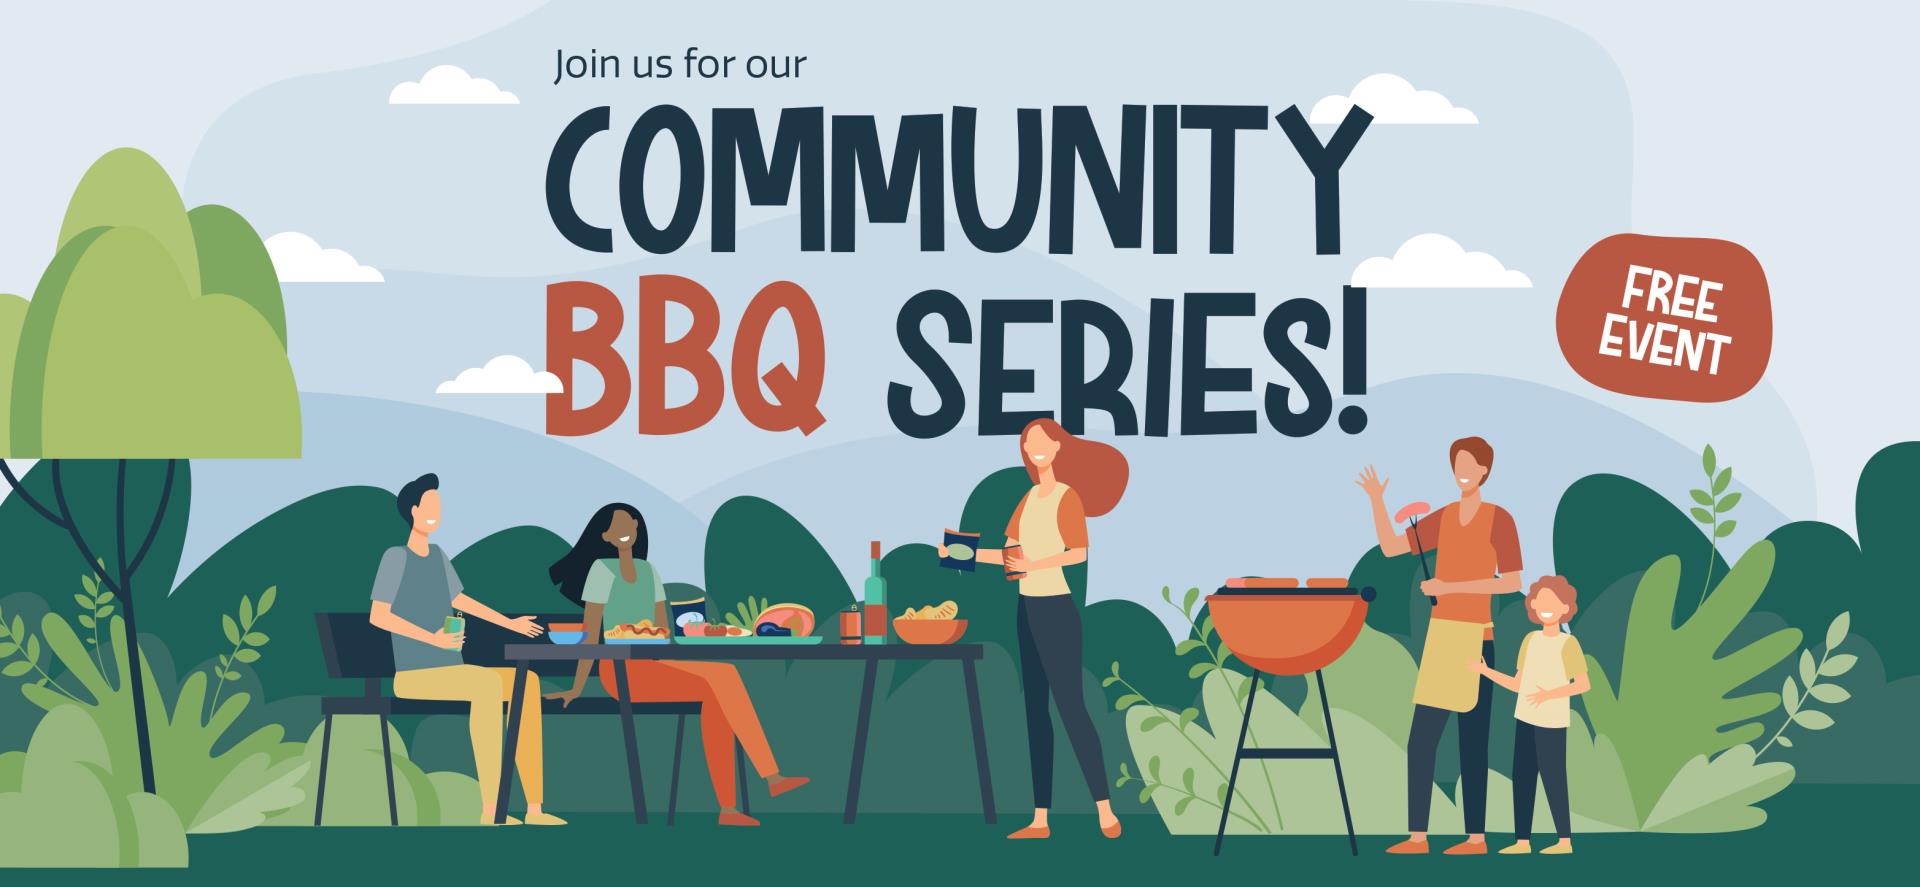 Community BBQ Series ready to sizzle